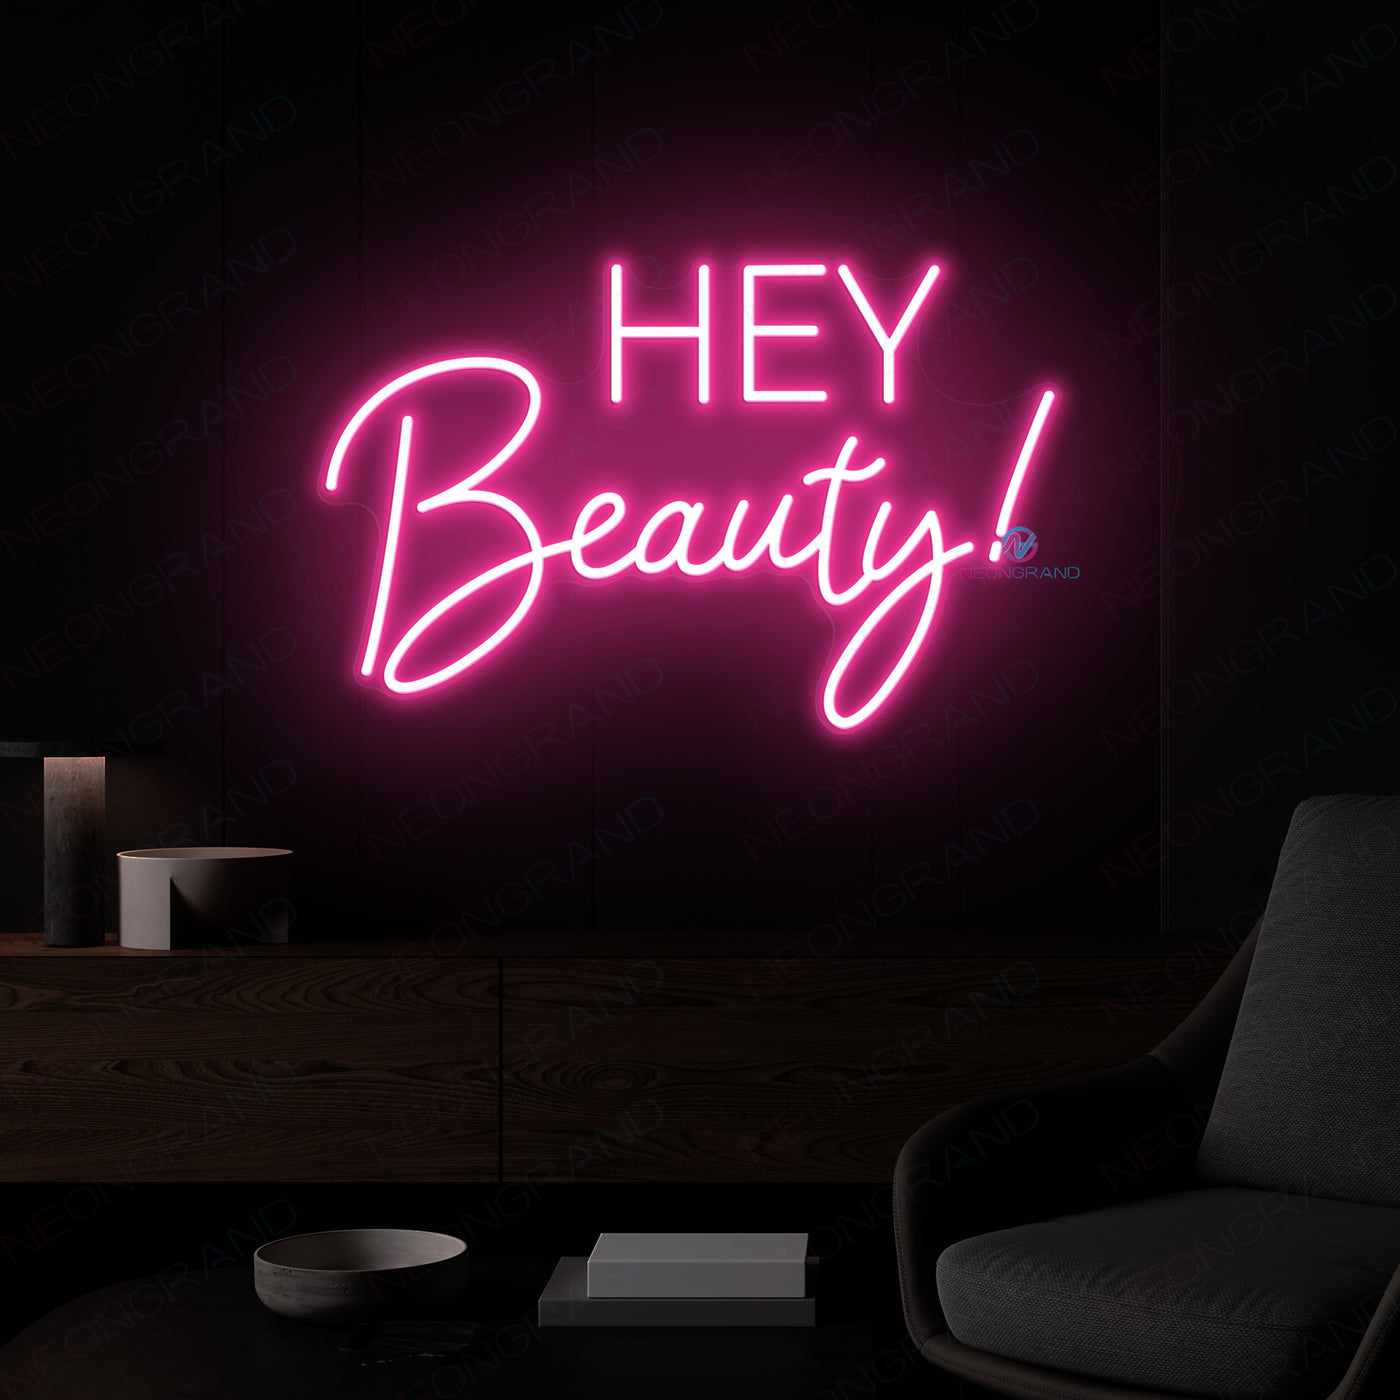 Hey Beauty Neon Sign Led Light Man Cave Neon Signs pink